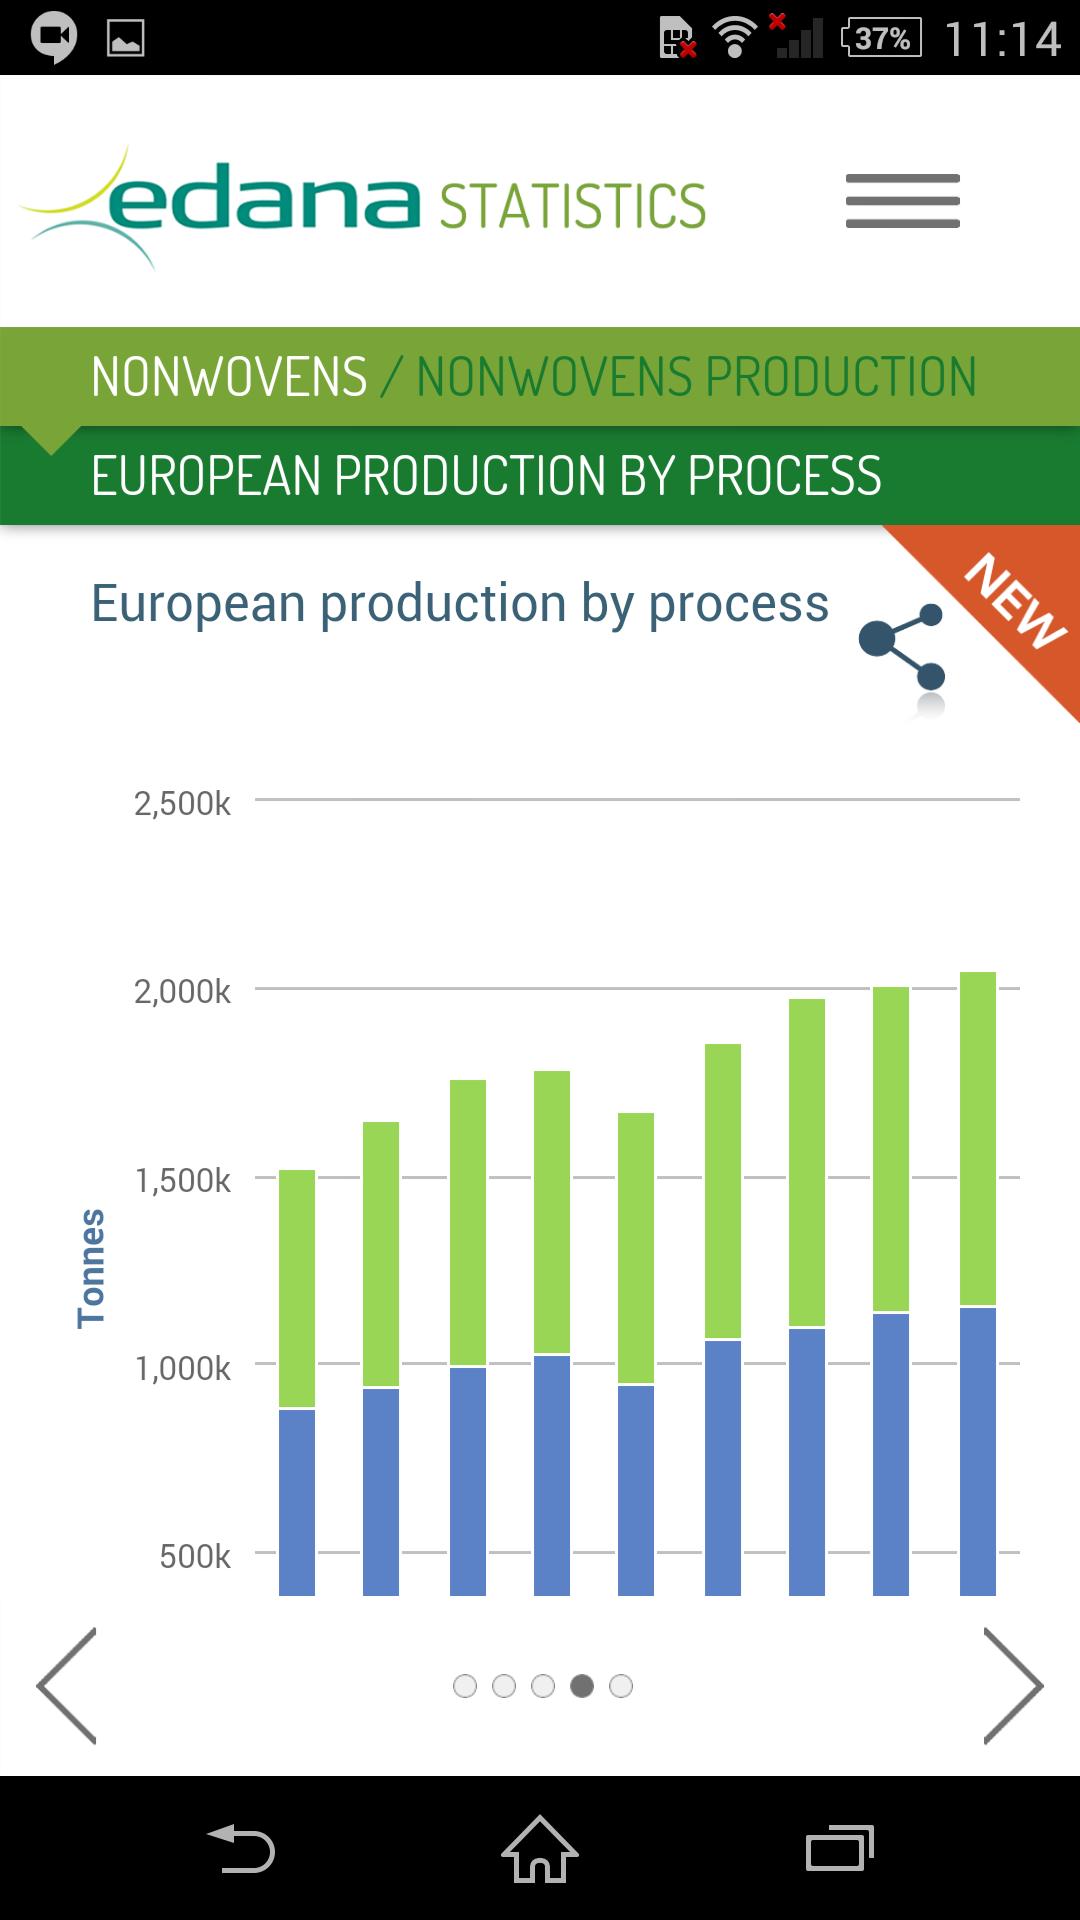 Eu product. Forecast for the 2020s.